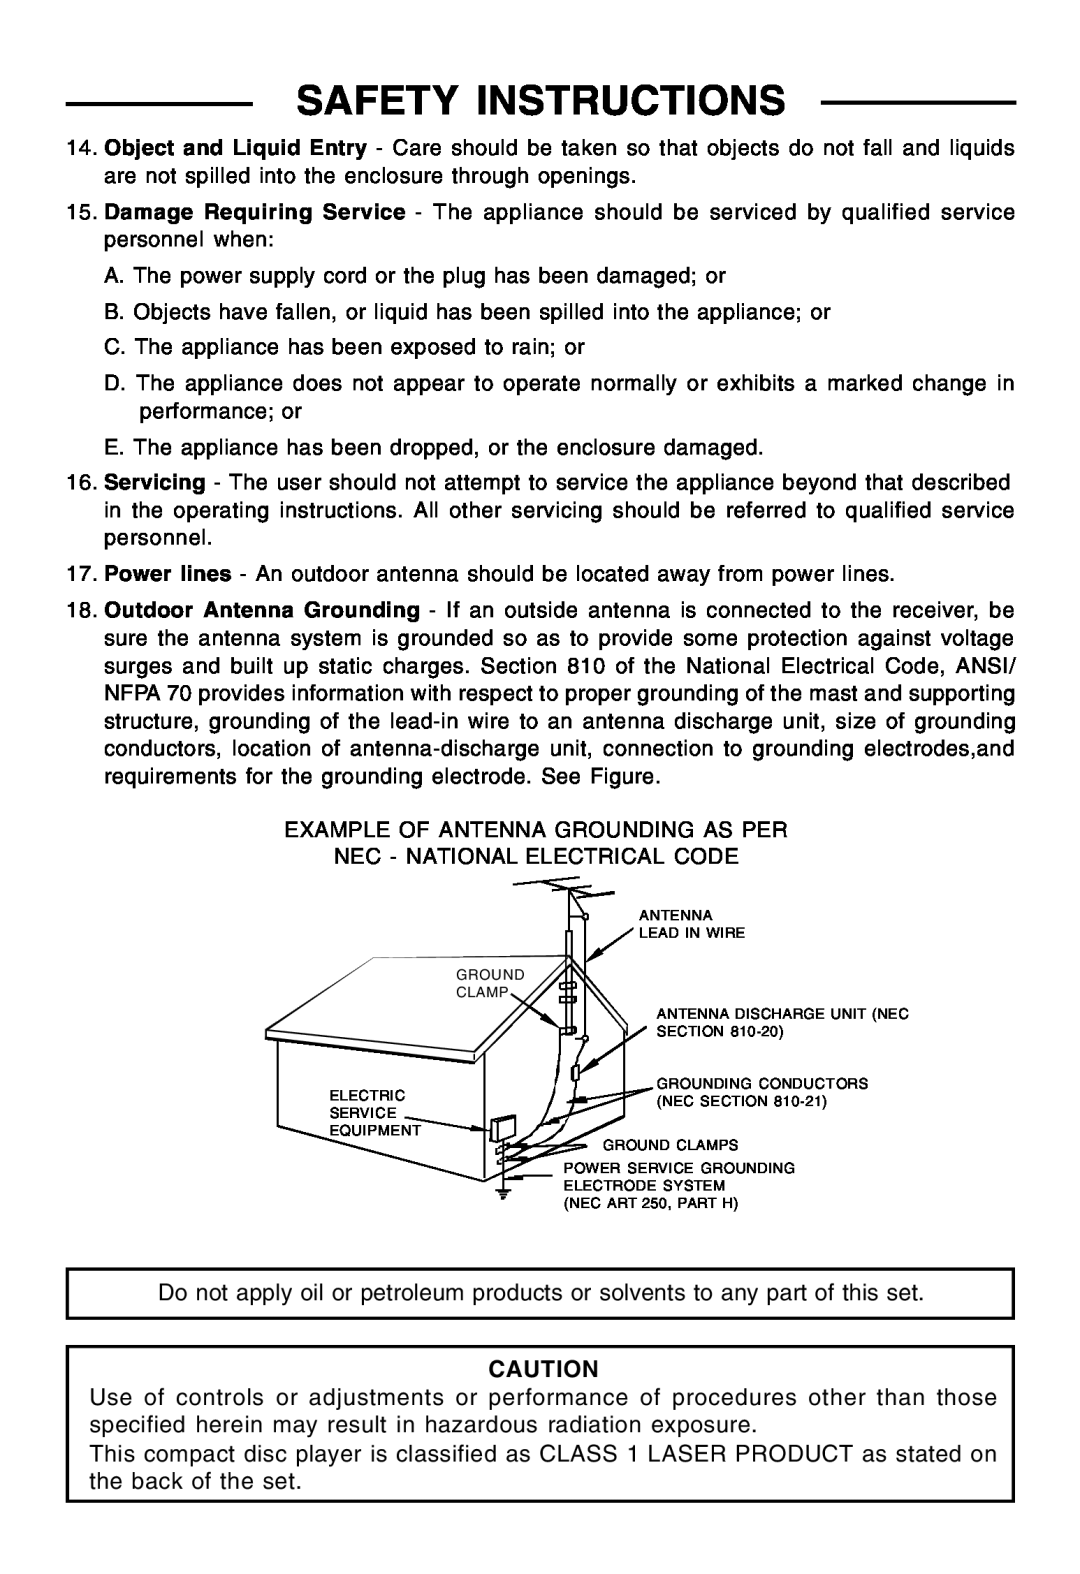 Lenoxx Electronics CDR-190 operating instructions Safety Instructions, C.The appliance has been exposed to rain or 